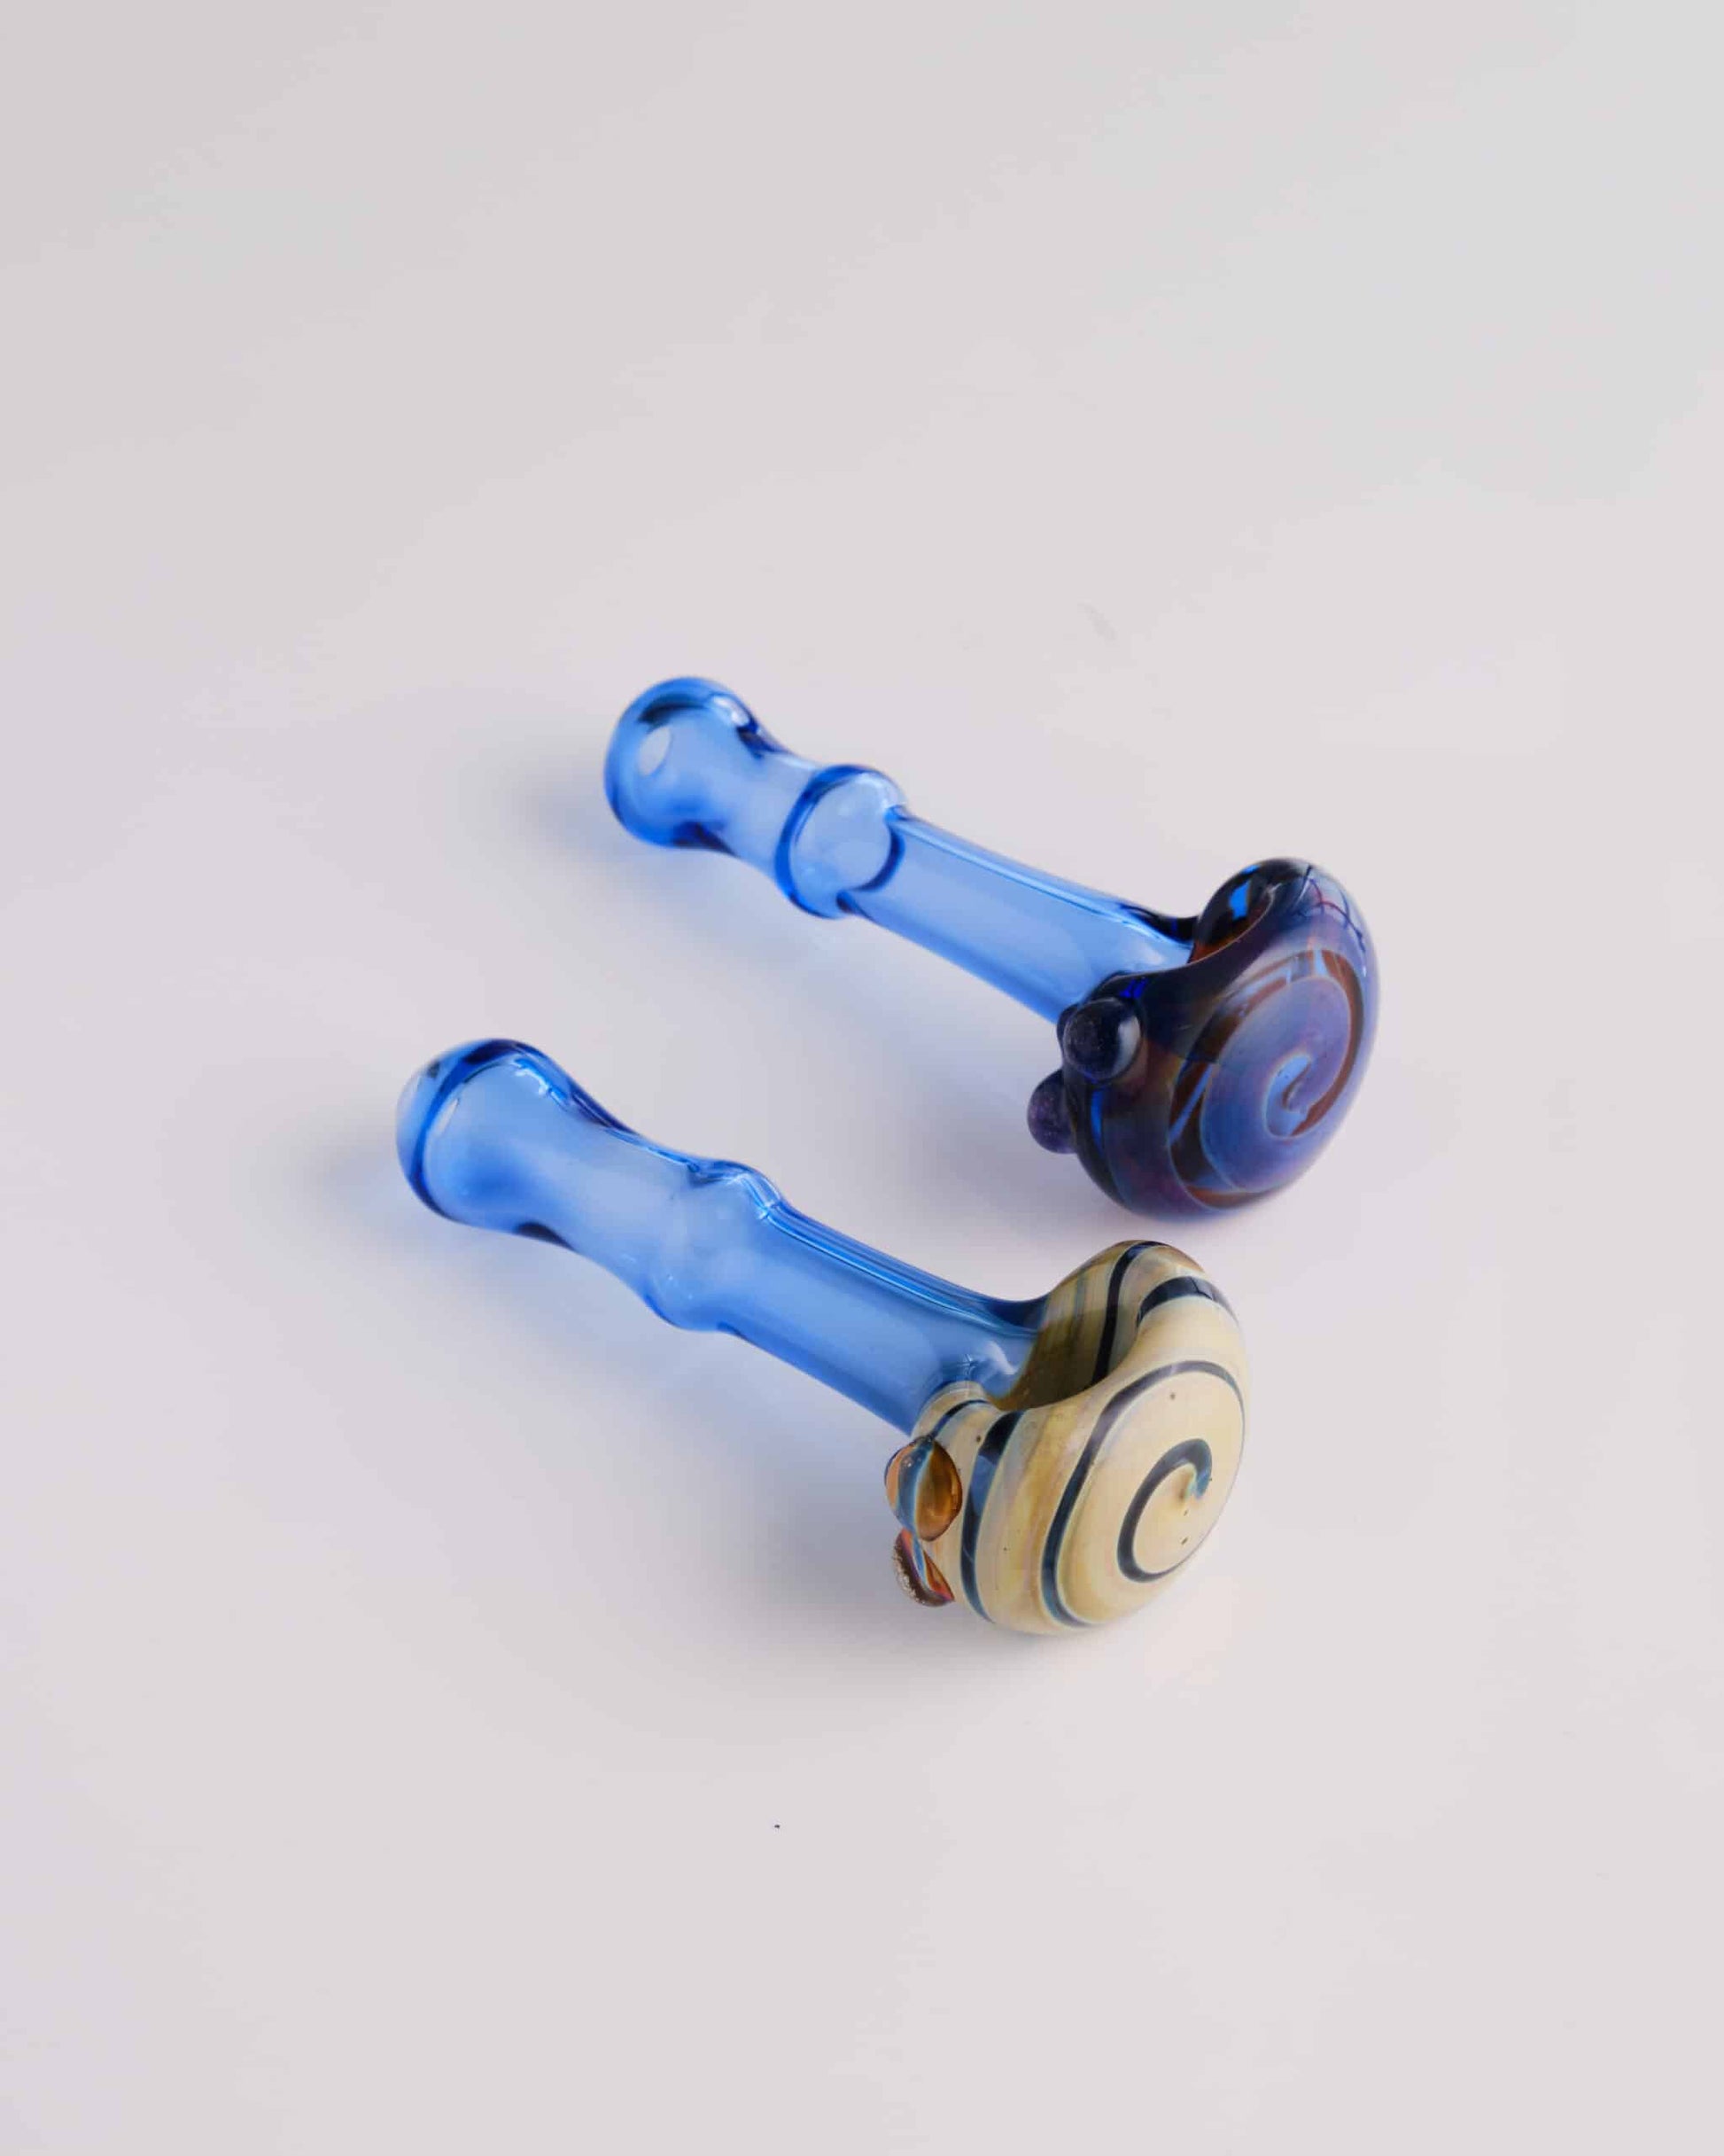 luxurious design of the Blue Spoon Pipe w/ Yellow Swirl by Willy That Glass Guy